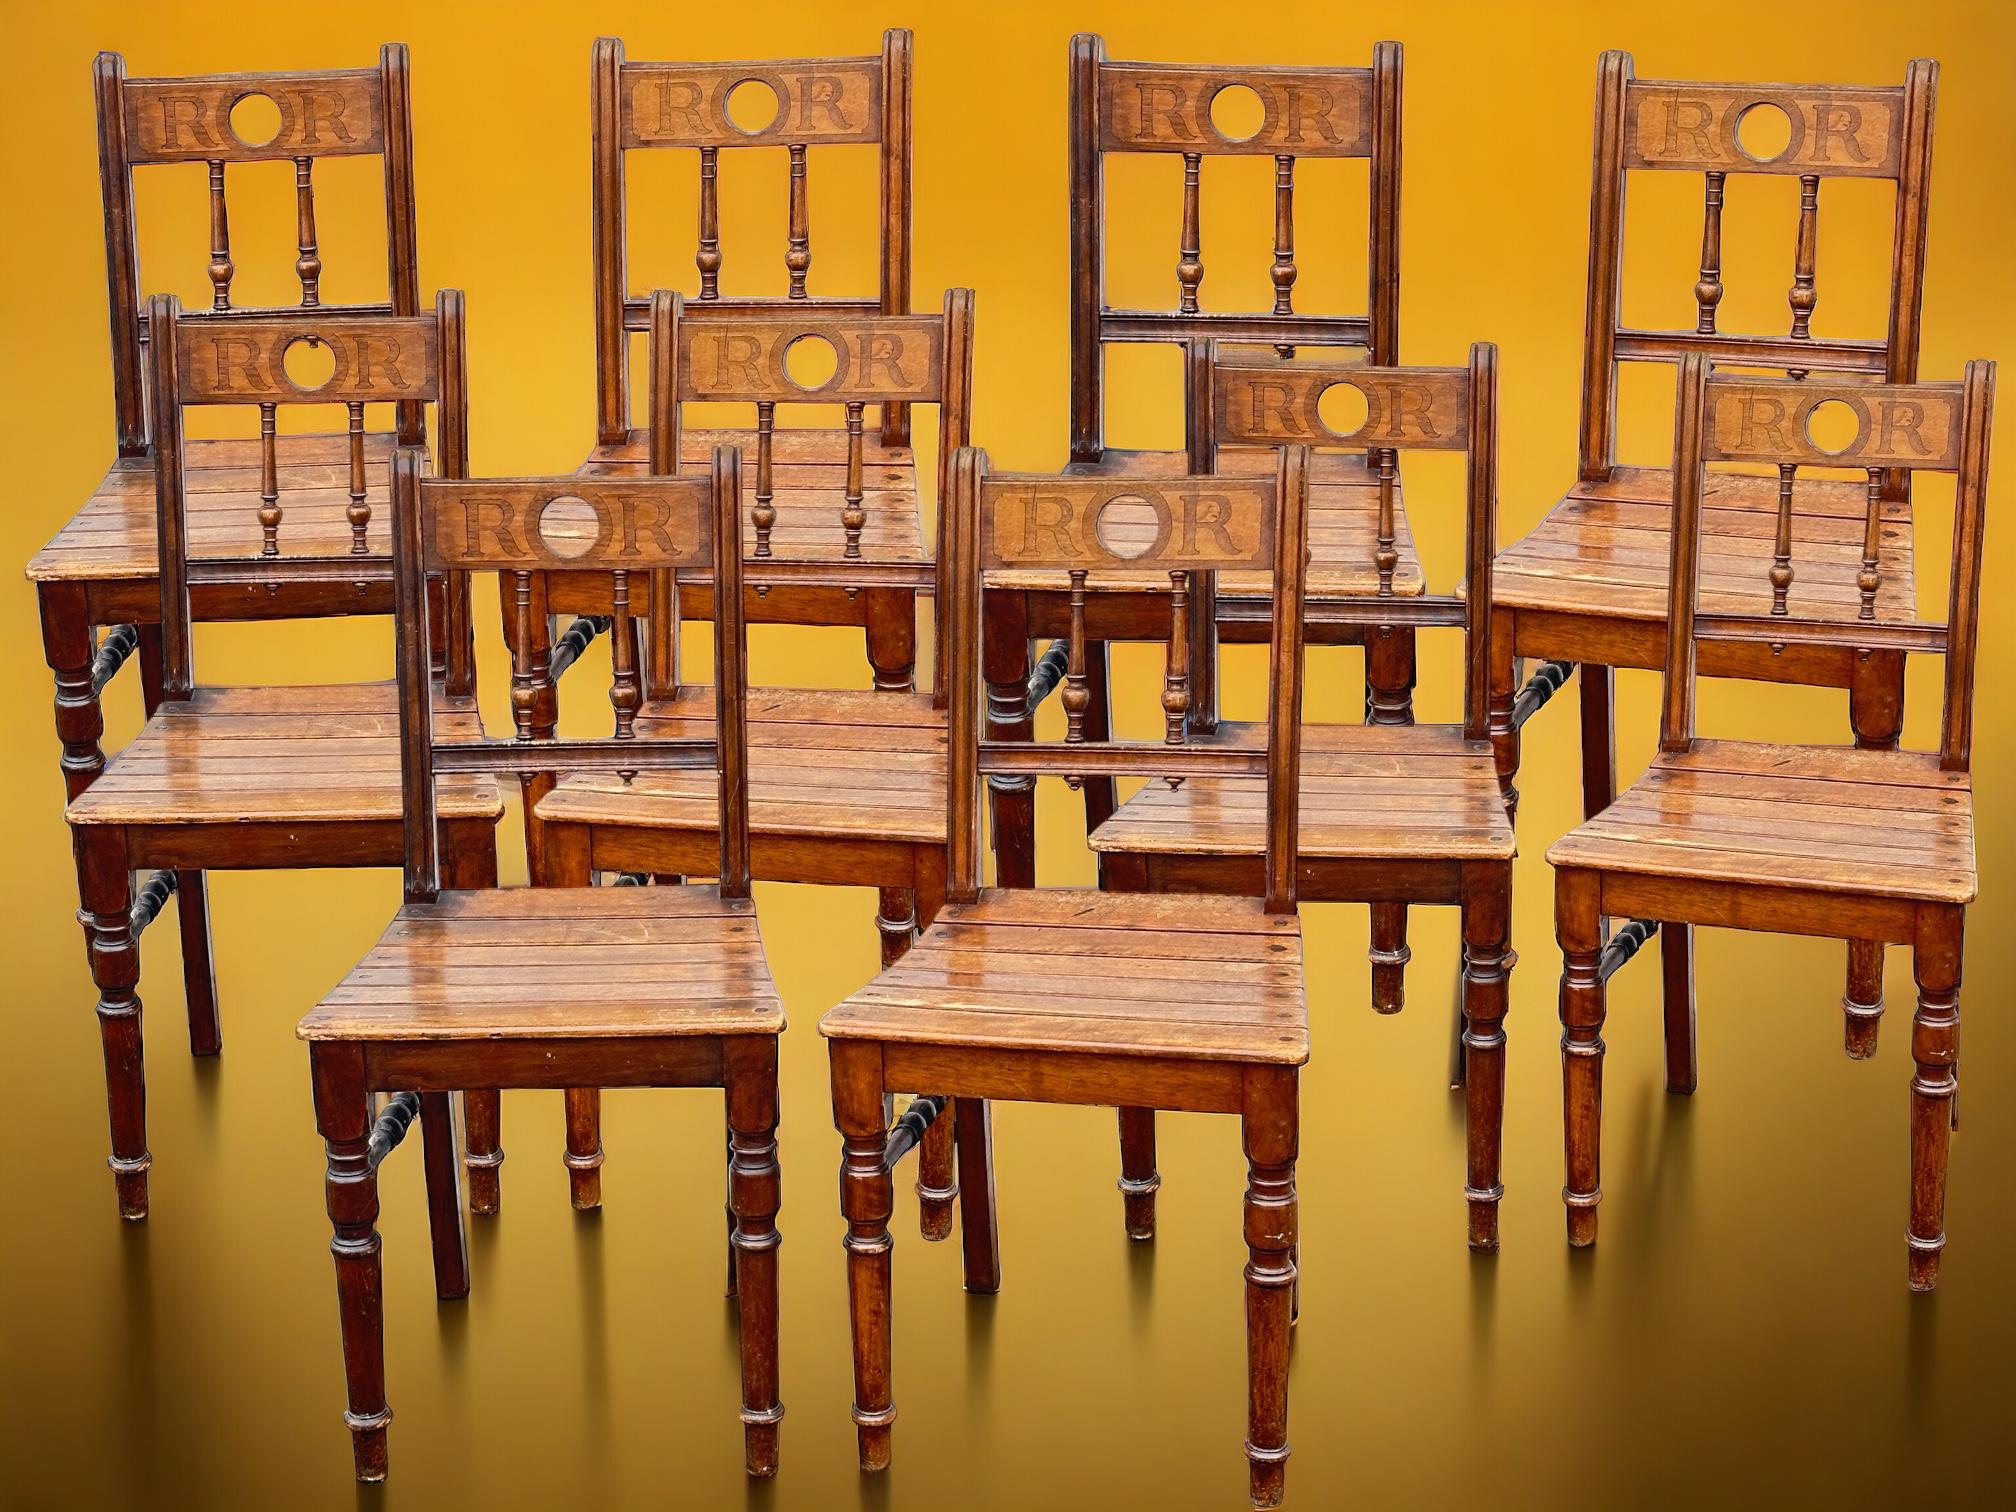 A set consisting of 10 chairs from the Castle Ratibor in the city of Roth, Bavaria. These chairs were used in the castles dining room and other rooms for events many years. Purchased during an estate sale and now these historically interesting